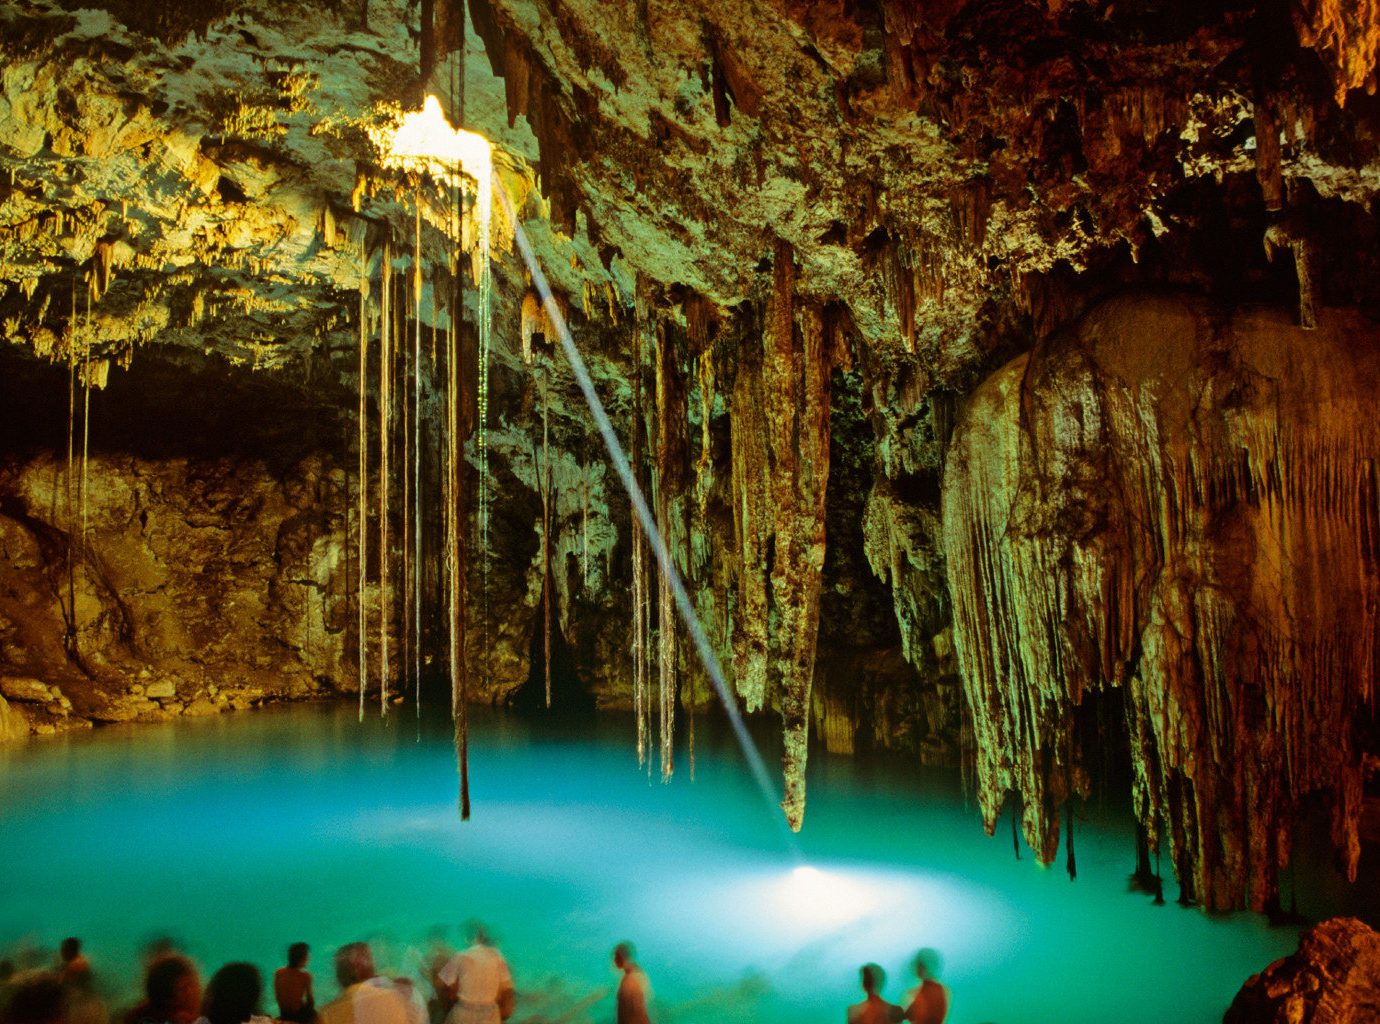 Adventure cenote Chichen Itza Cultural Outdoor Activities Scenic views Trip Ideas cave geographical feature Nature landform reflection formation Jungle